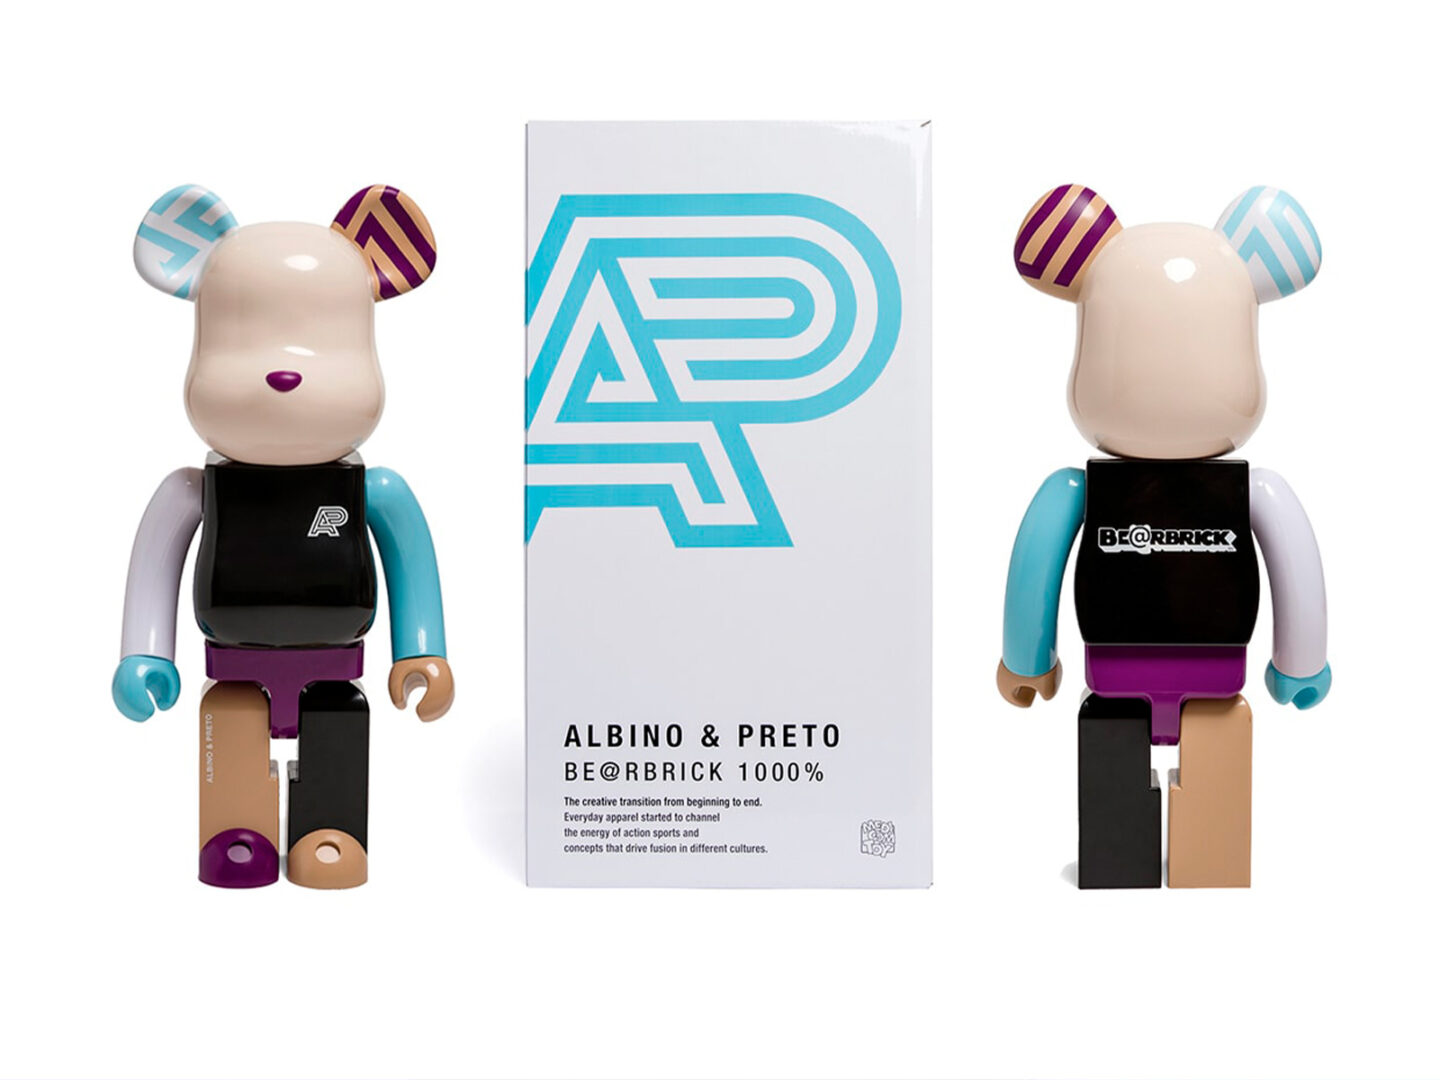 Albino & Preto and Medicom Toy reconnect to launch their BE@RBRICK